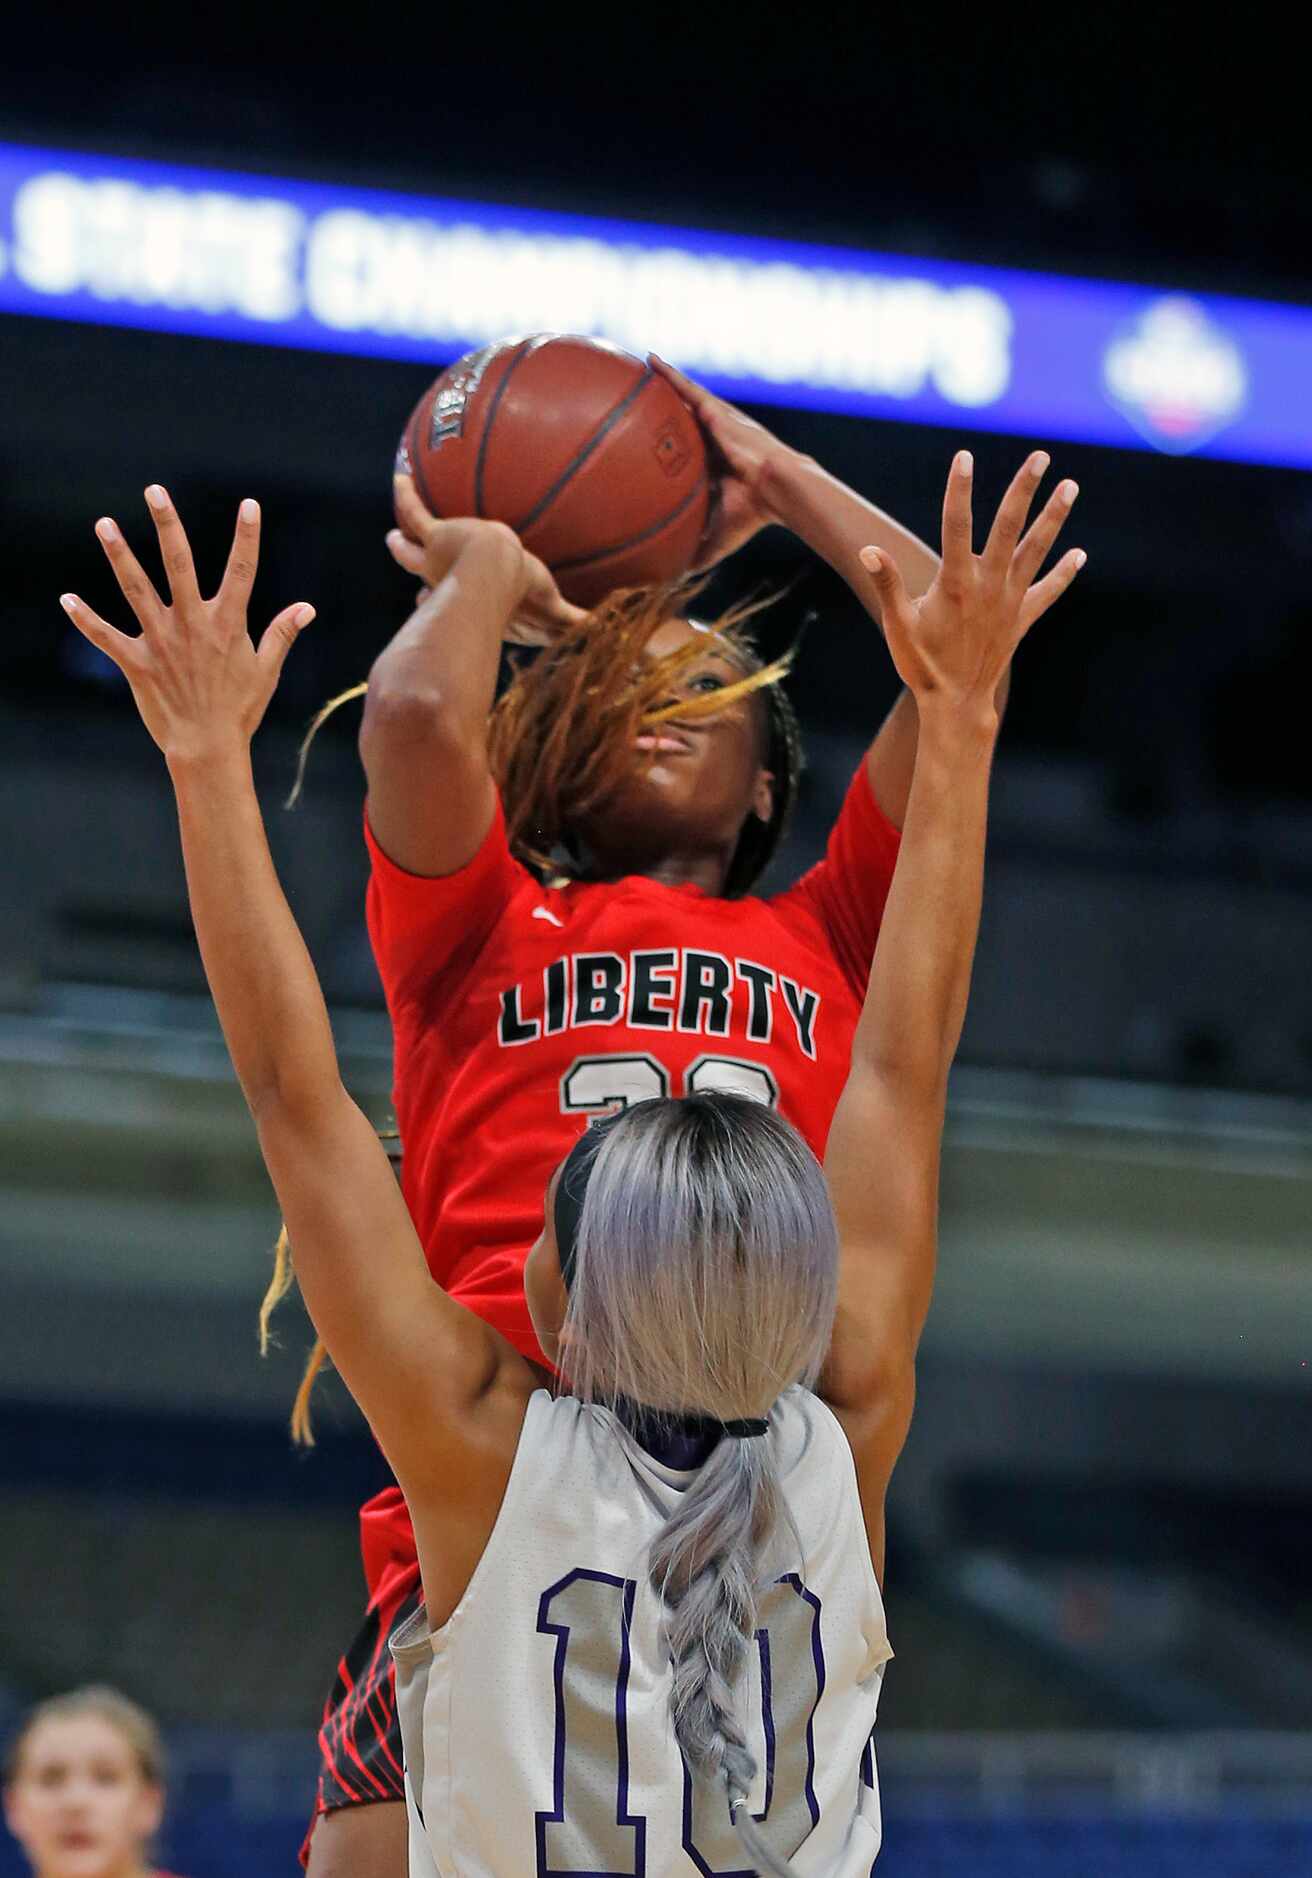 Frisco Liberty Jazzy Owens-Barnett shoots over College Station guard Mia Rivers #10 in...